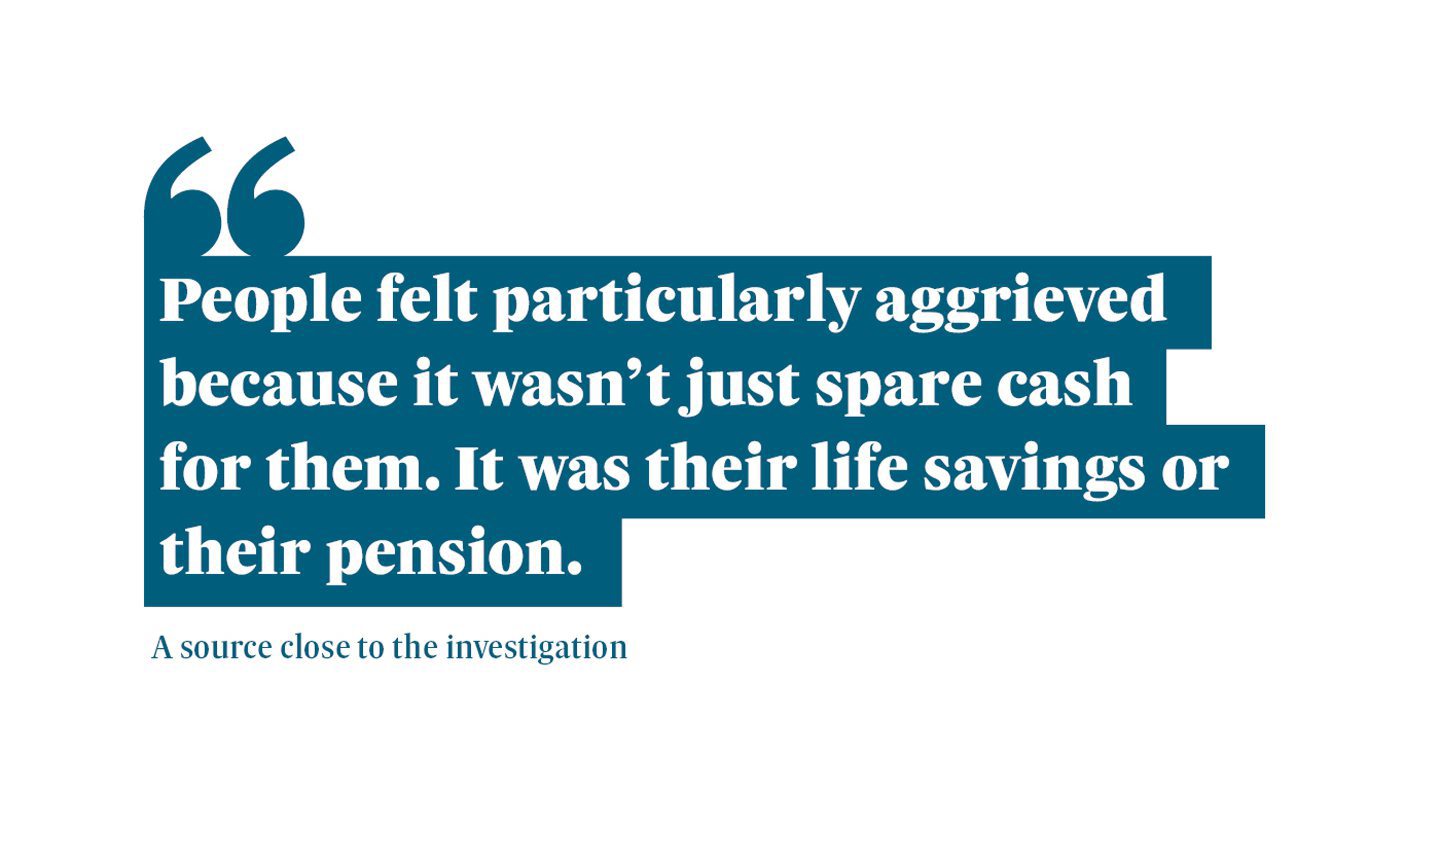 A graphic that reads: "People felt particularly aggrieved because it wasn’t just spare cash for them. It was their life savings or their pension.” A quote from a source close to the Alistair Greig investigation.